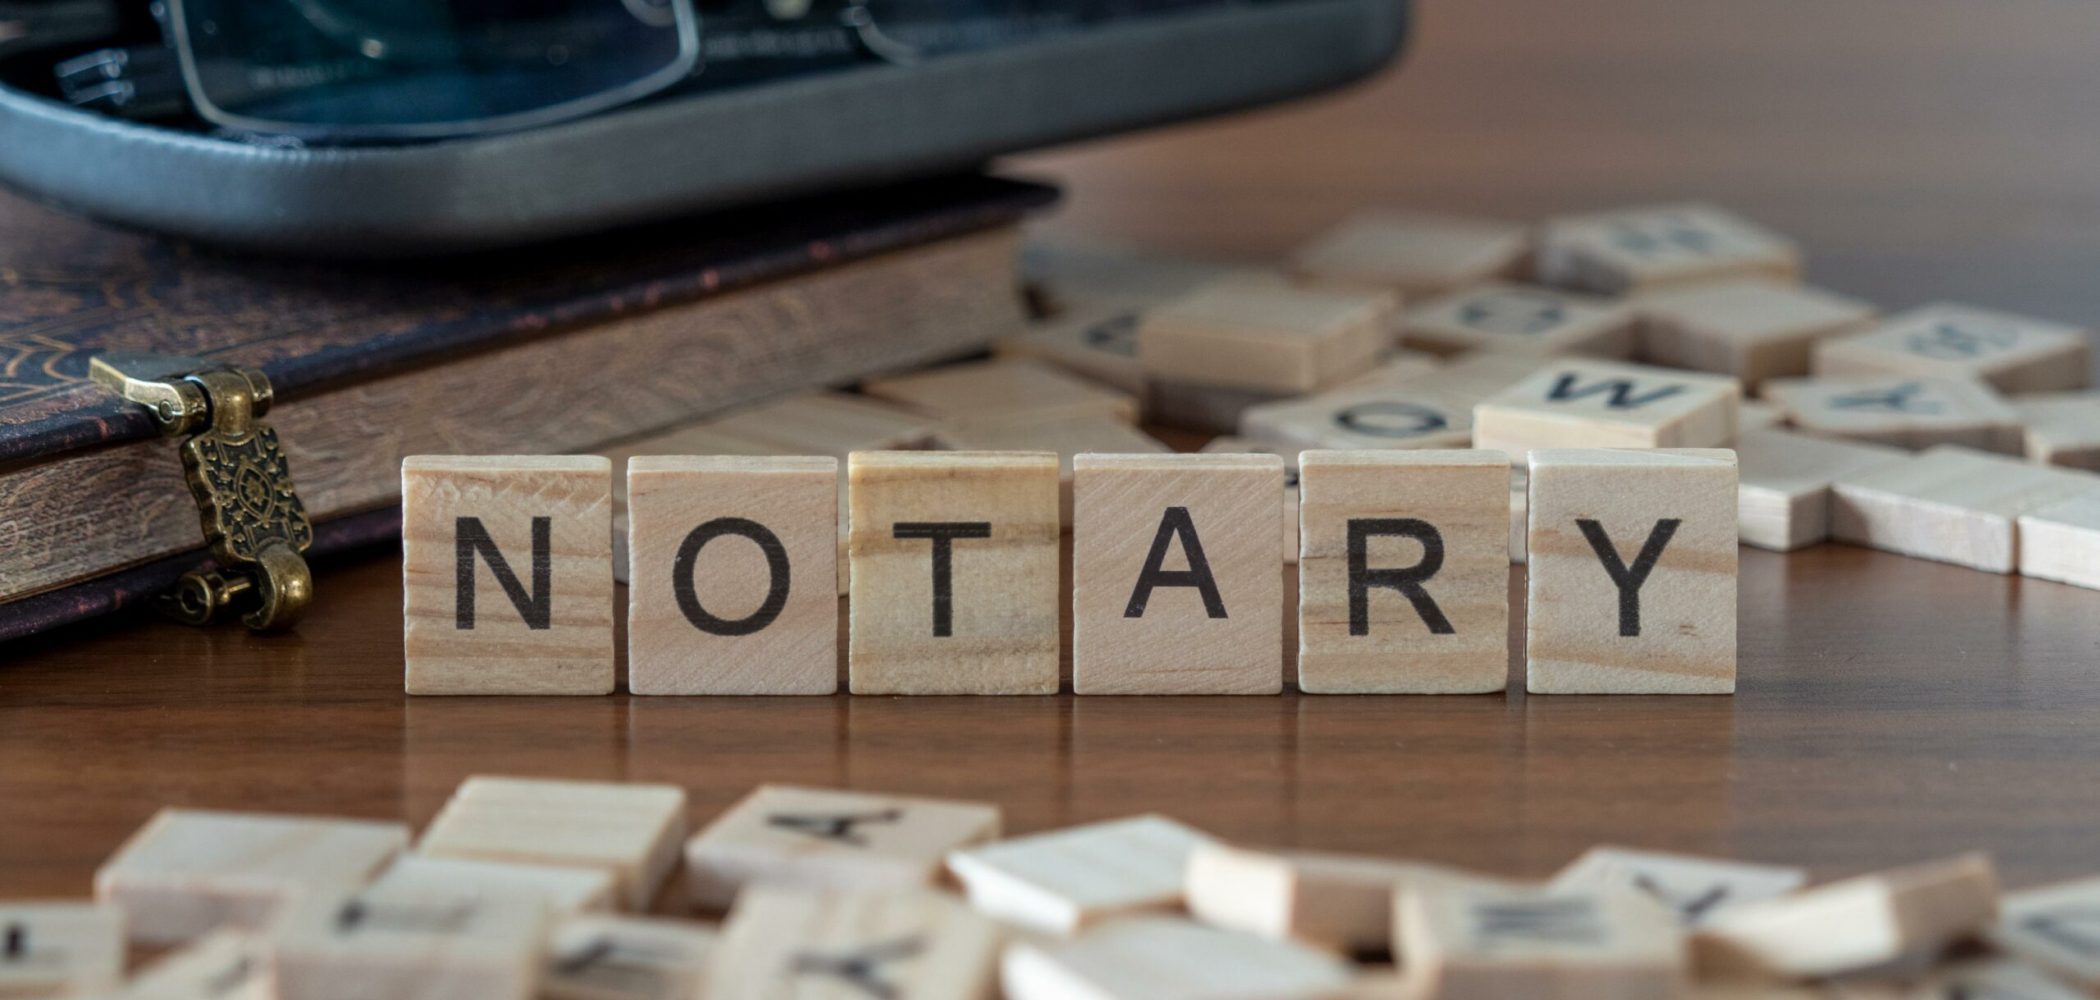 notary the word or concept represented by wooden letter tiles